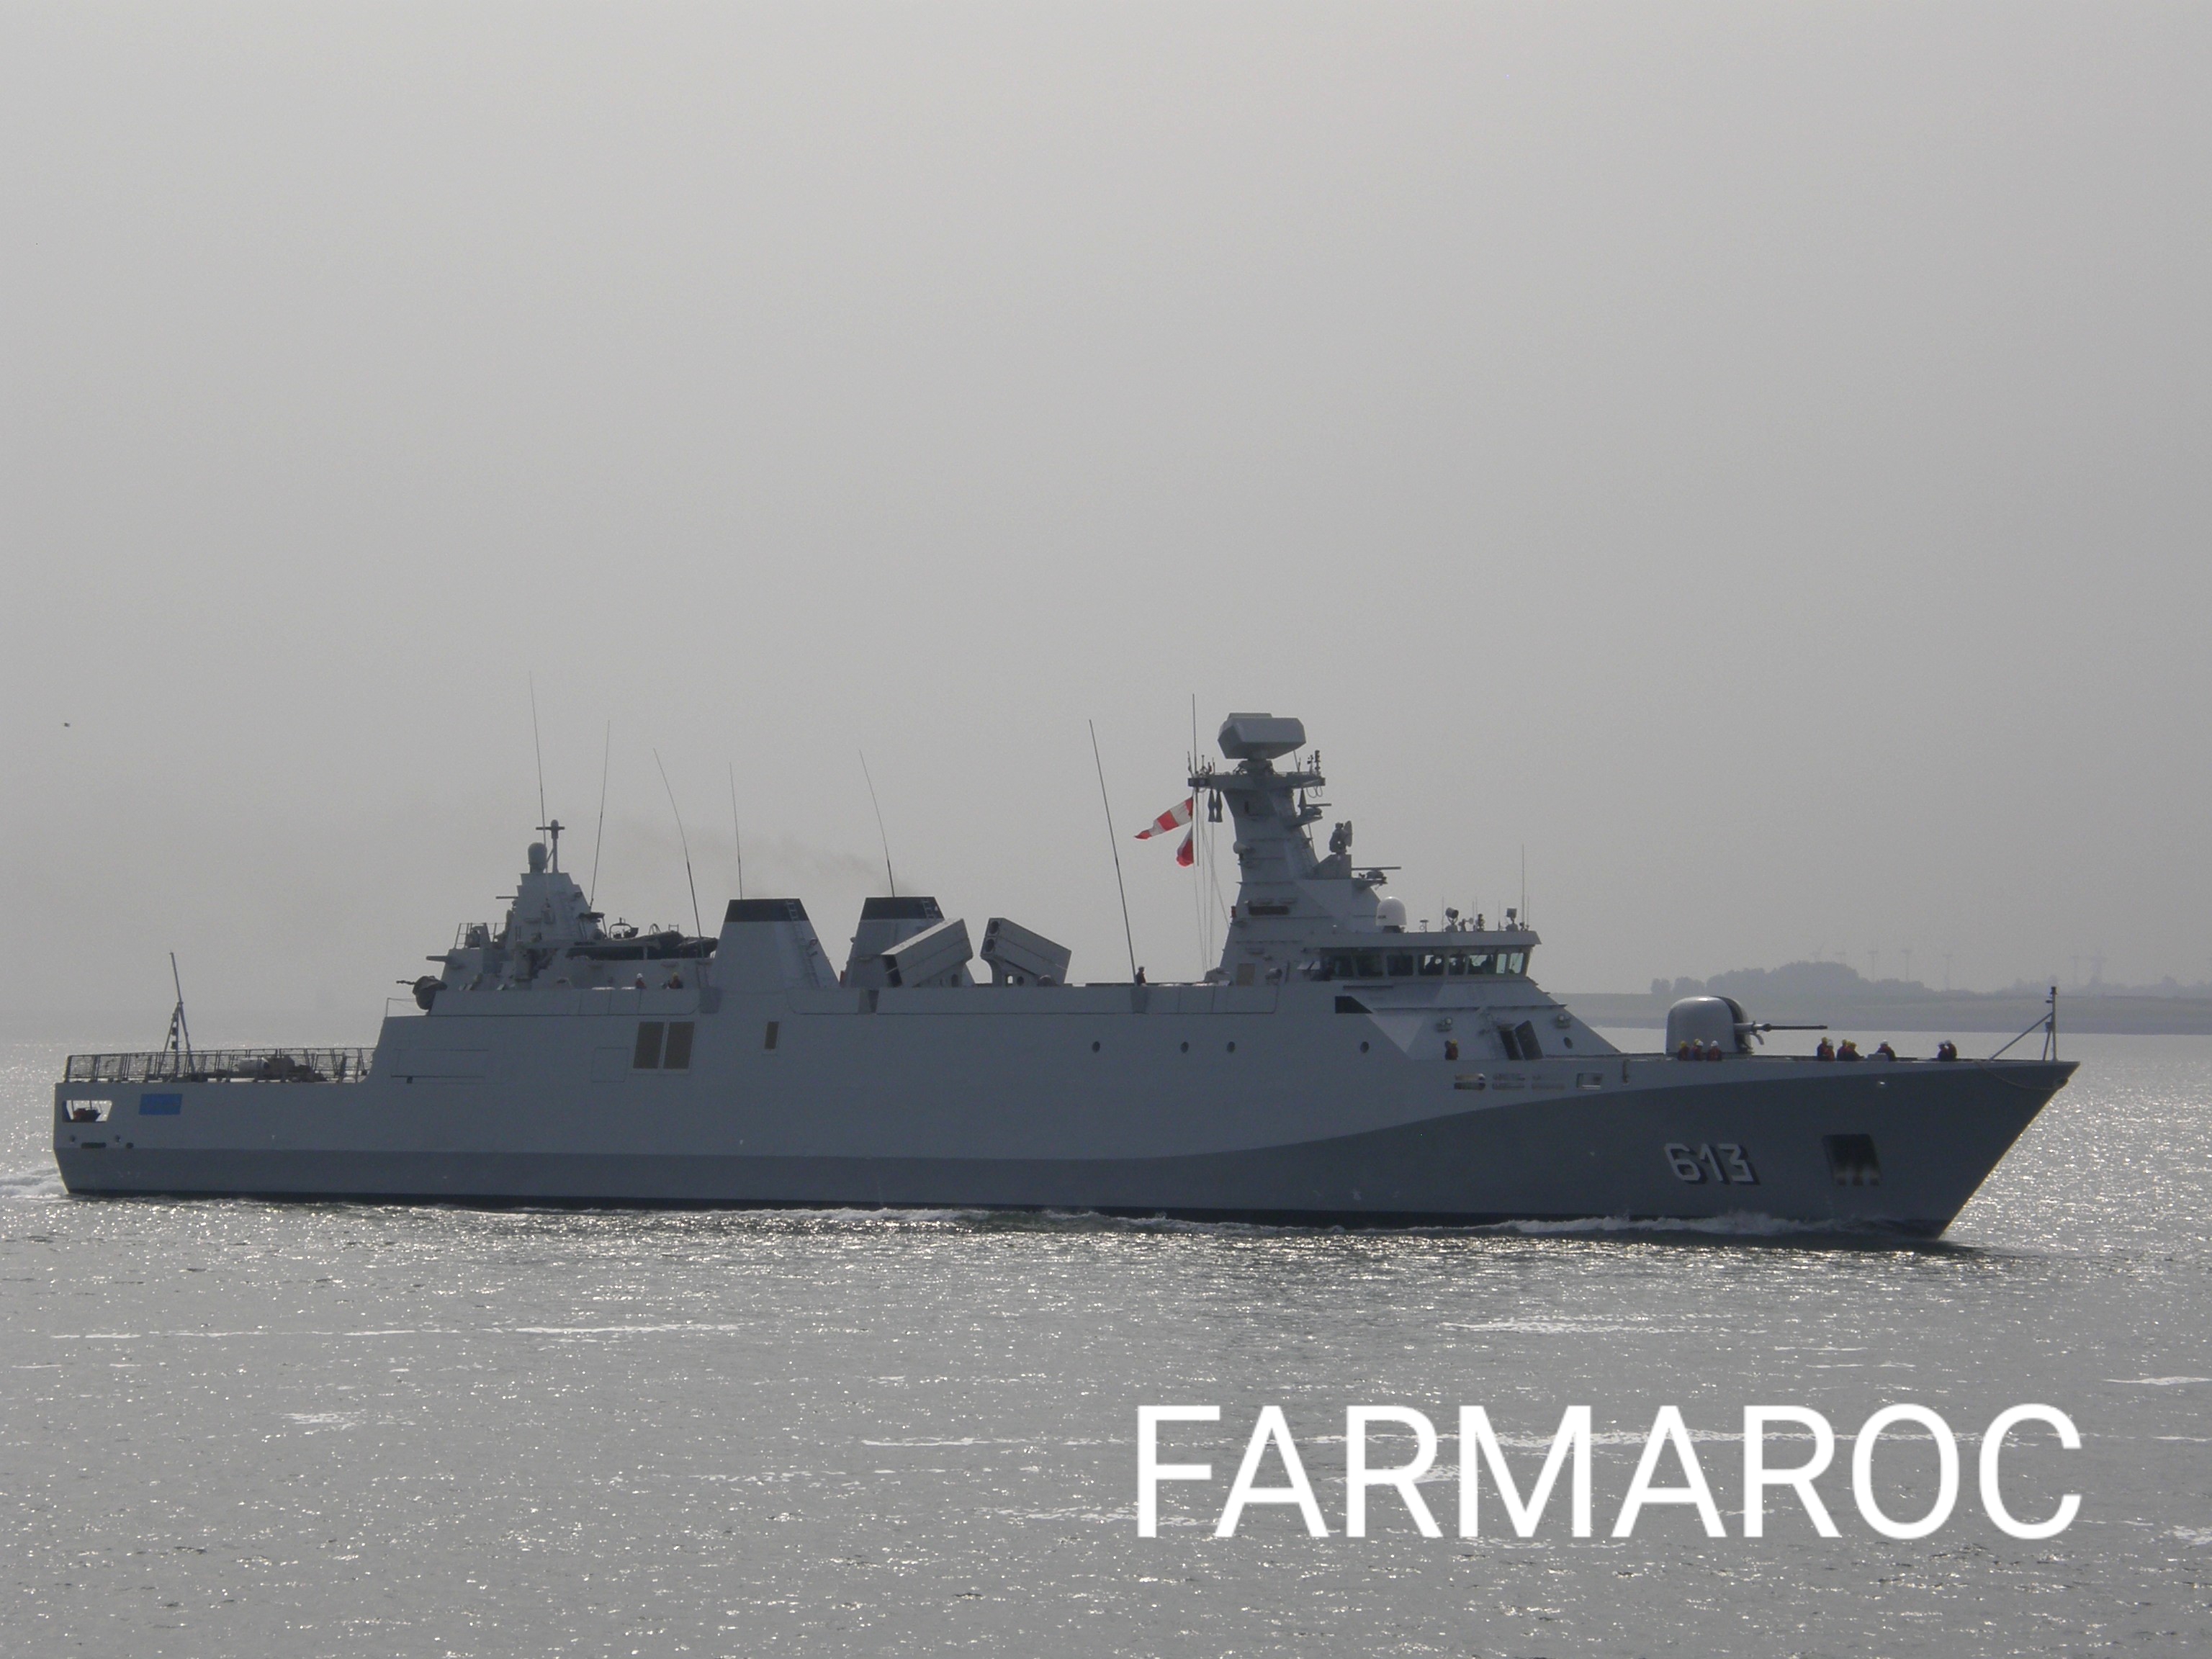 Royal Moroccan Navy Sigma class frigates / Frégates marocaines multimissions Sigma - Page 24 42792453422_18631f4a3f_o